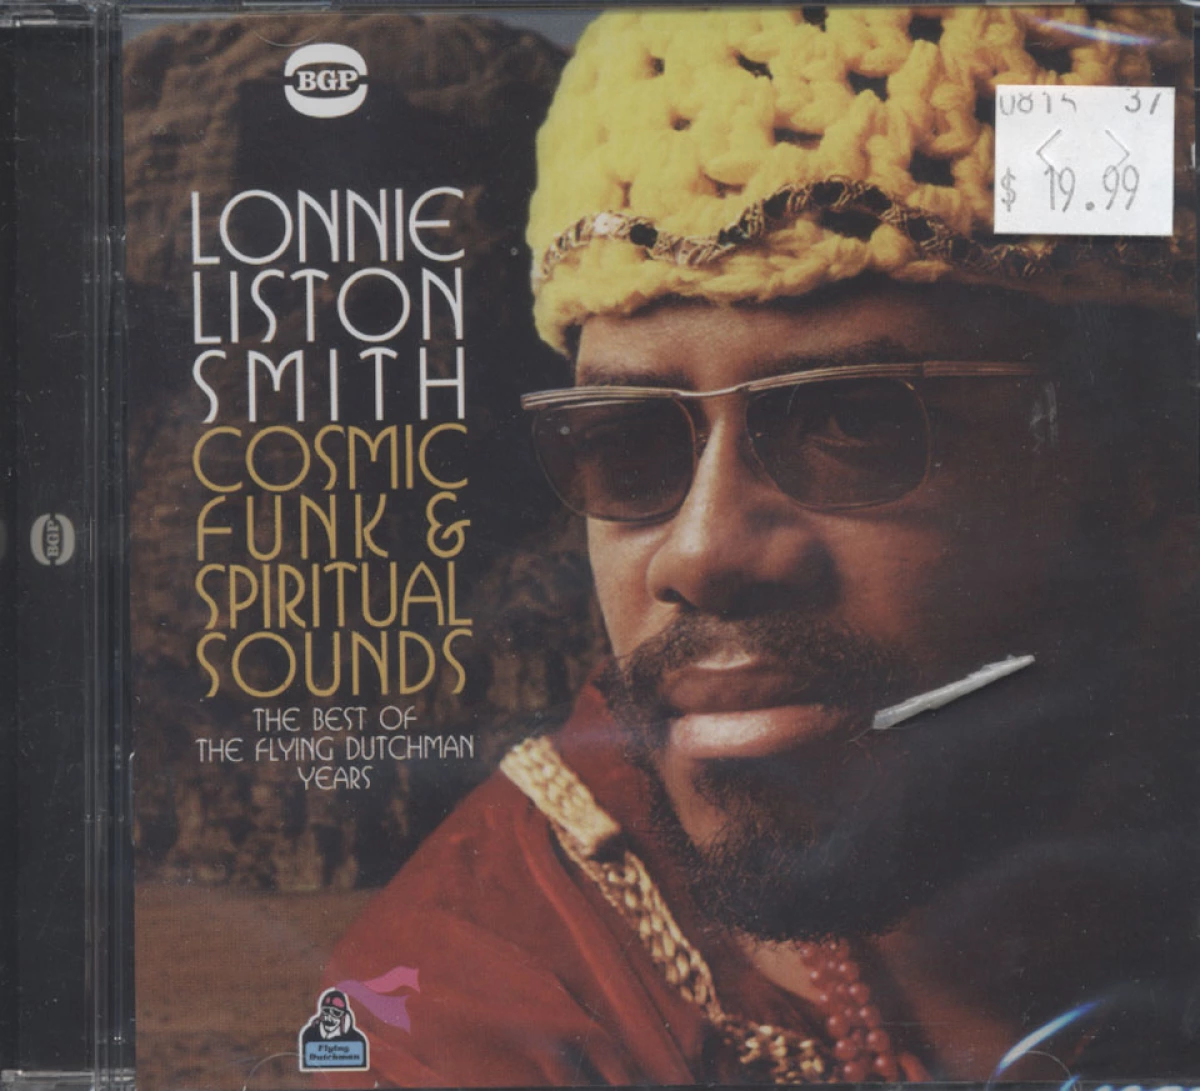 Lonnie Liston Smith CD, 2012 at Wolfgang's